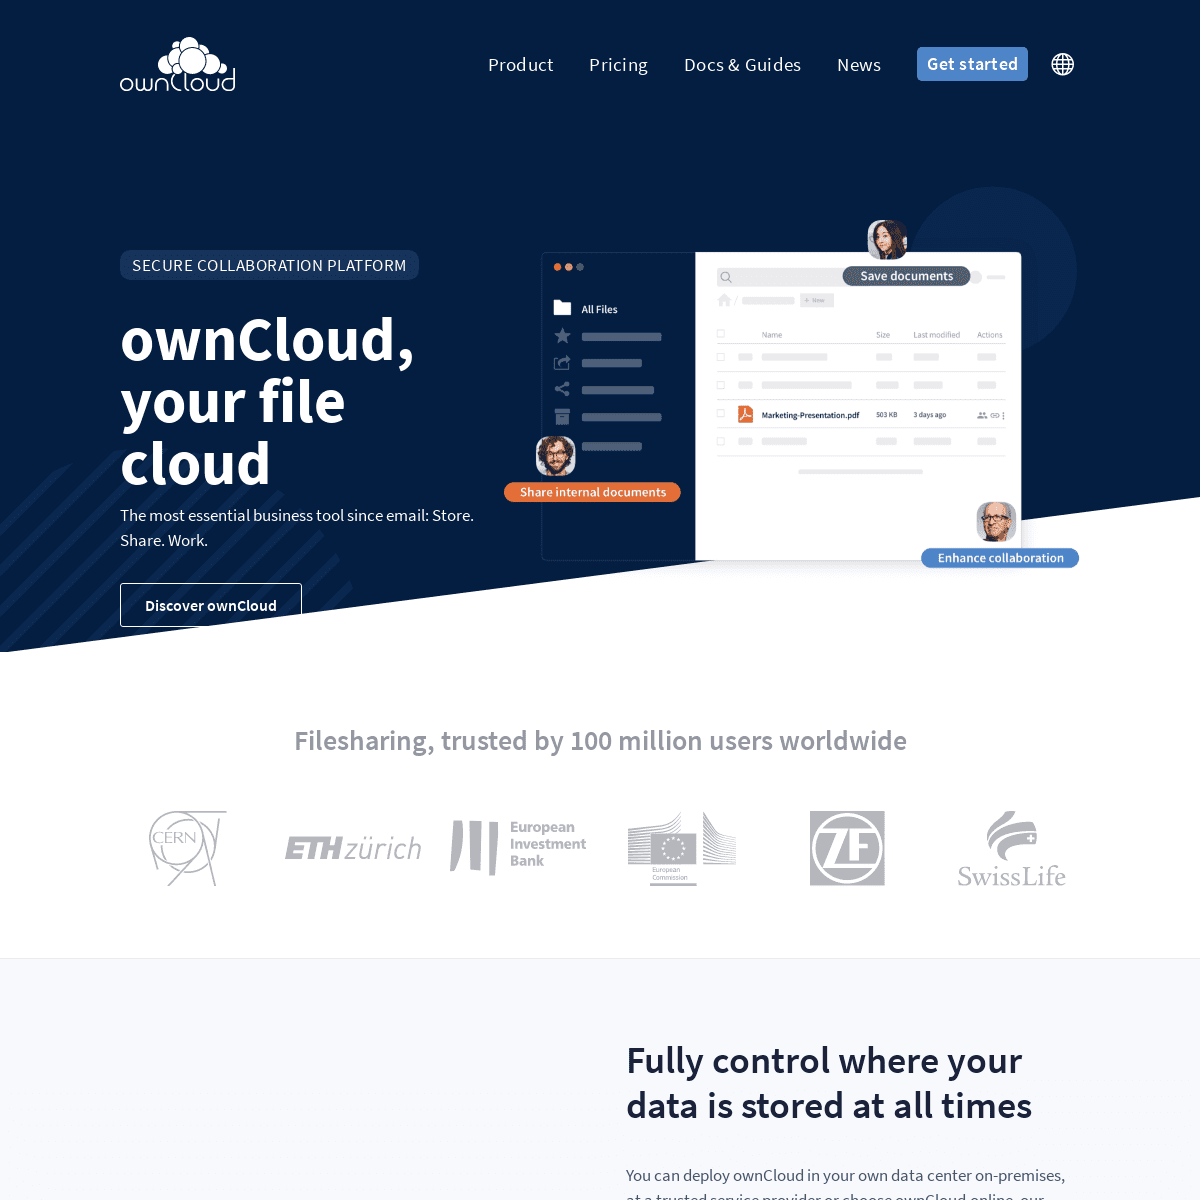 A complete backup of https://owncloud.org